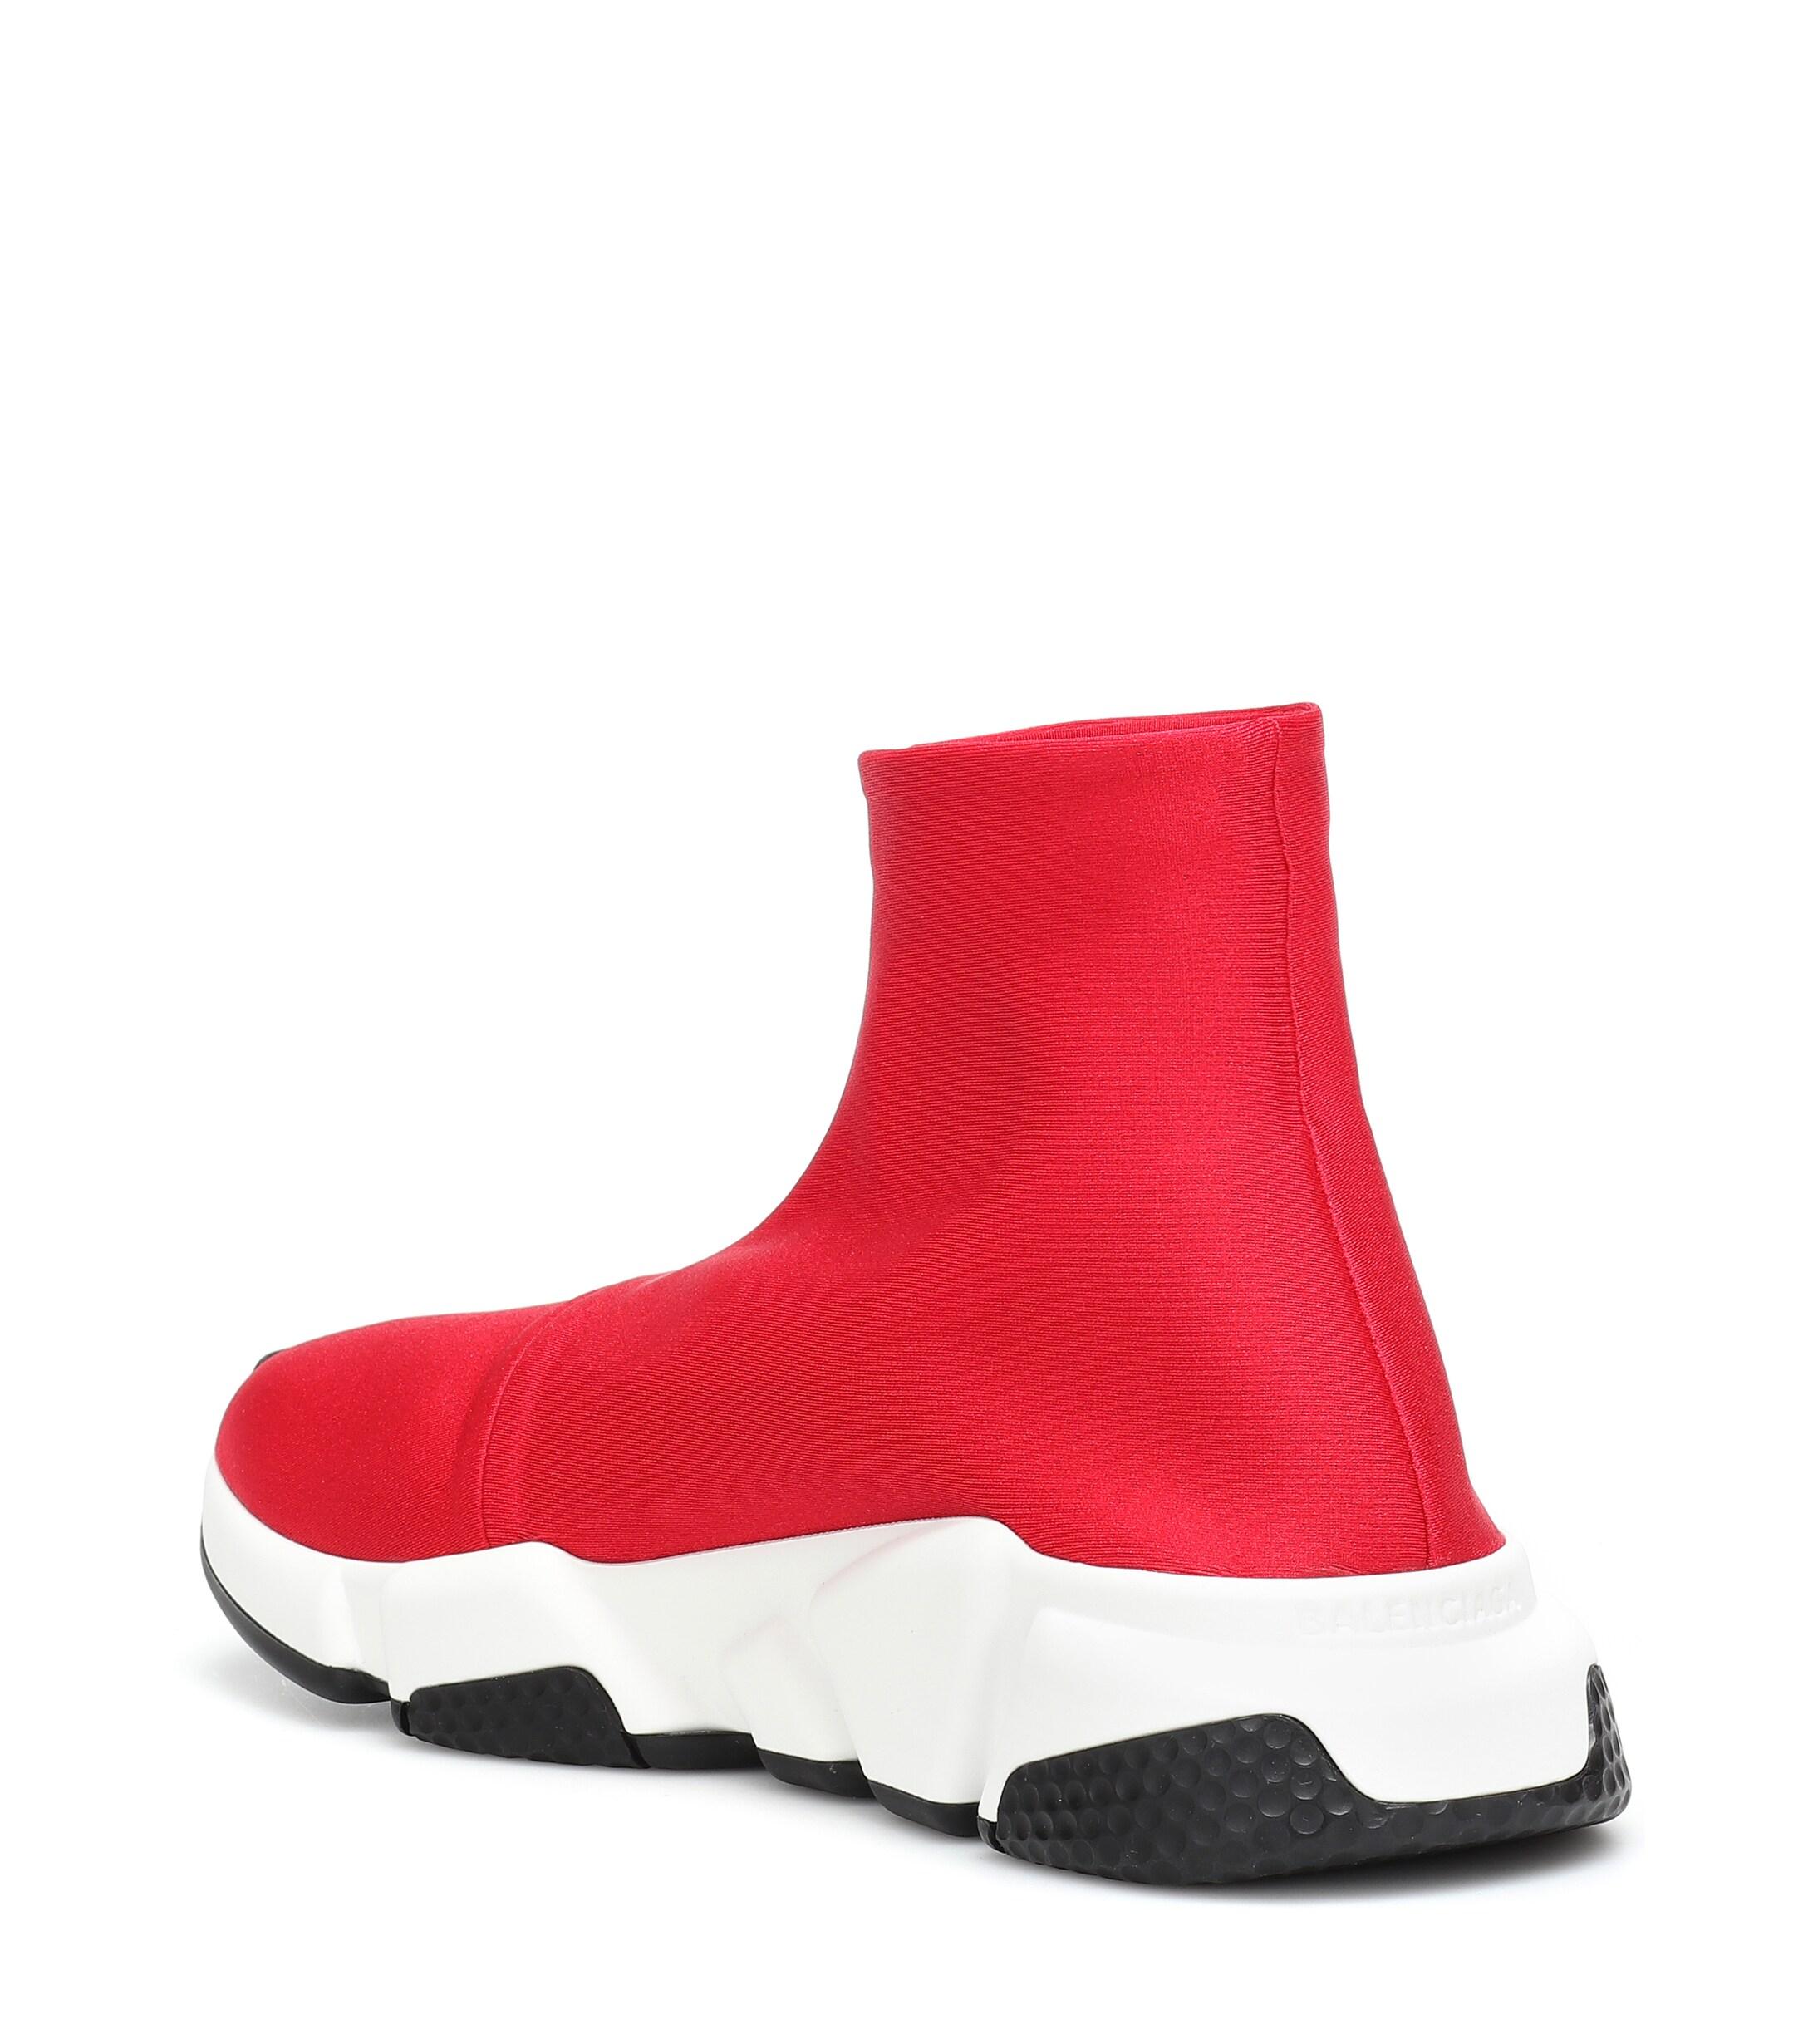 Balenciaga Speed Sneakers in Red - Lyst